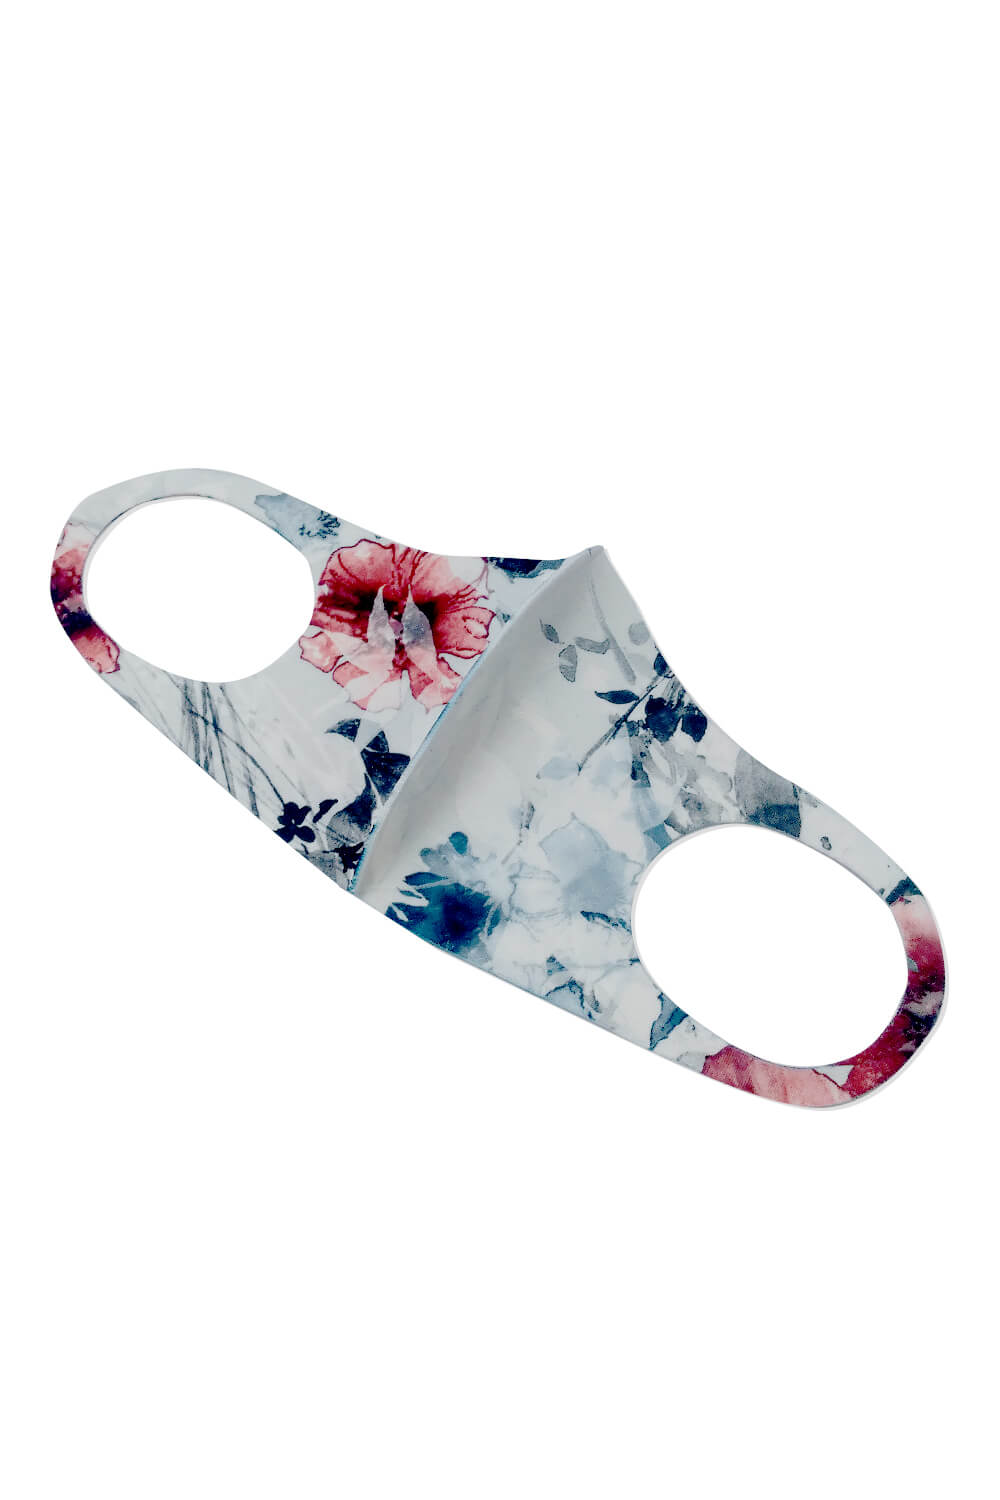  Floral Print Fast Drying Fashion Face Mask, Image 2 of 2